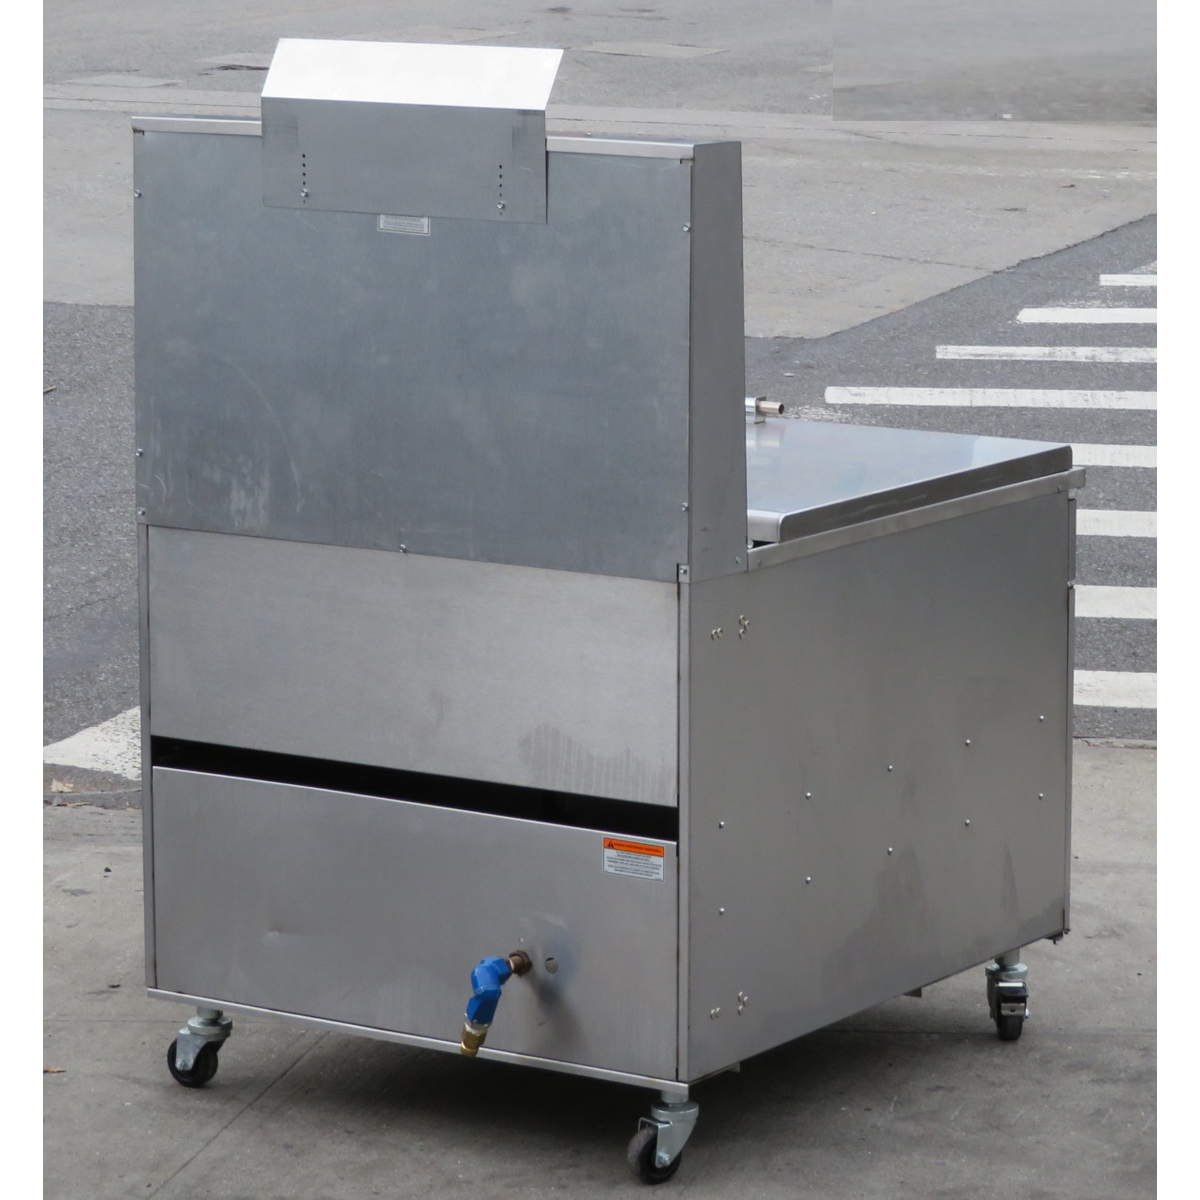 Pitco 34PSS Gas Donut Fryer with 210 Lb Oil Capacity, Brand New image 3